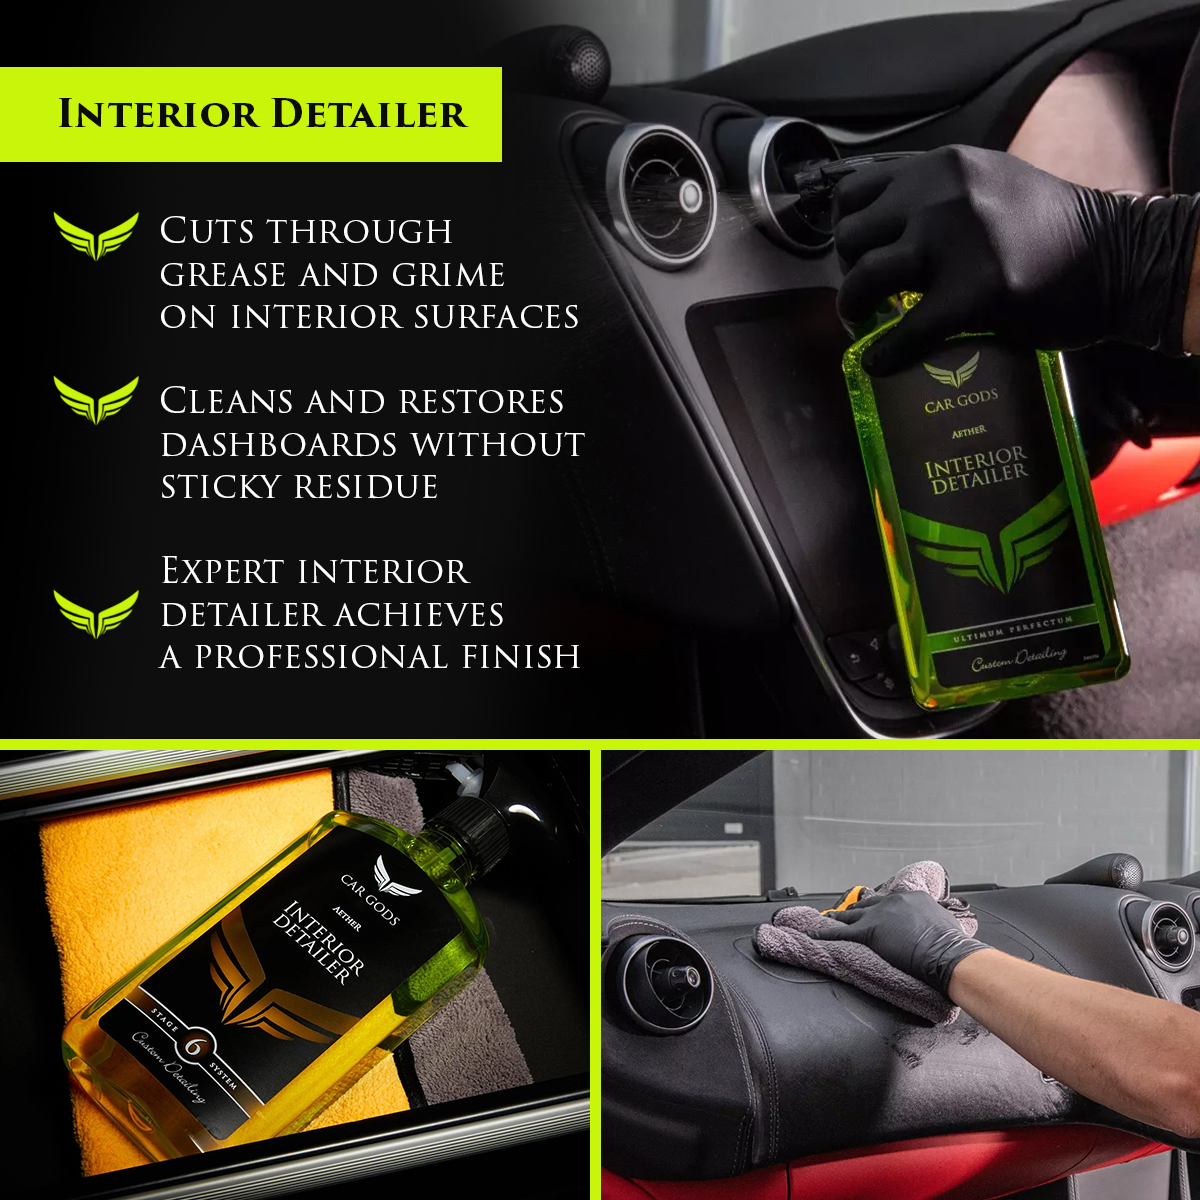 Car Gods Interior Detailer cuts through grease and grime to clean and restore your car’s interior surfaces. Interior Detailer offers a professional finish and a heavenly apple-scent.